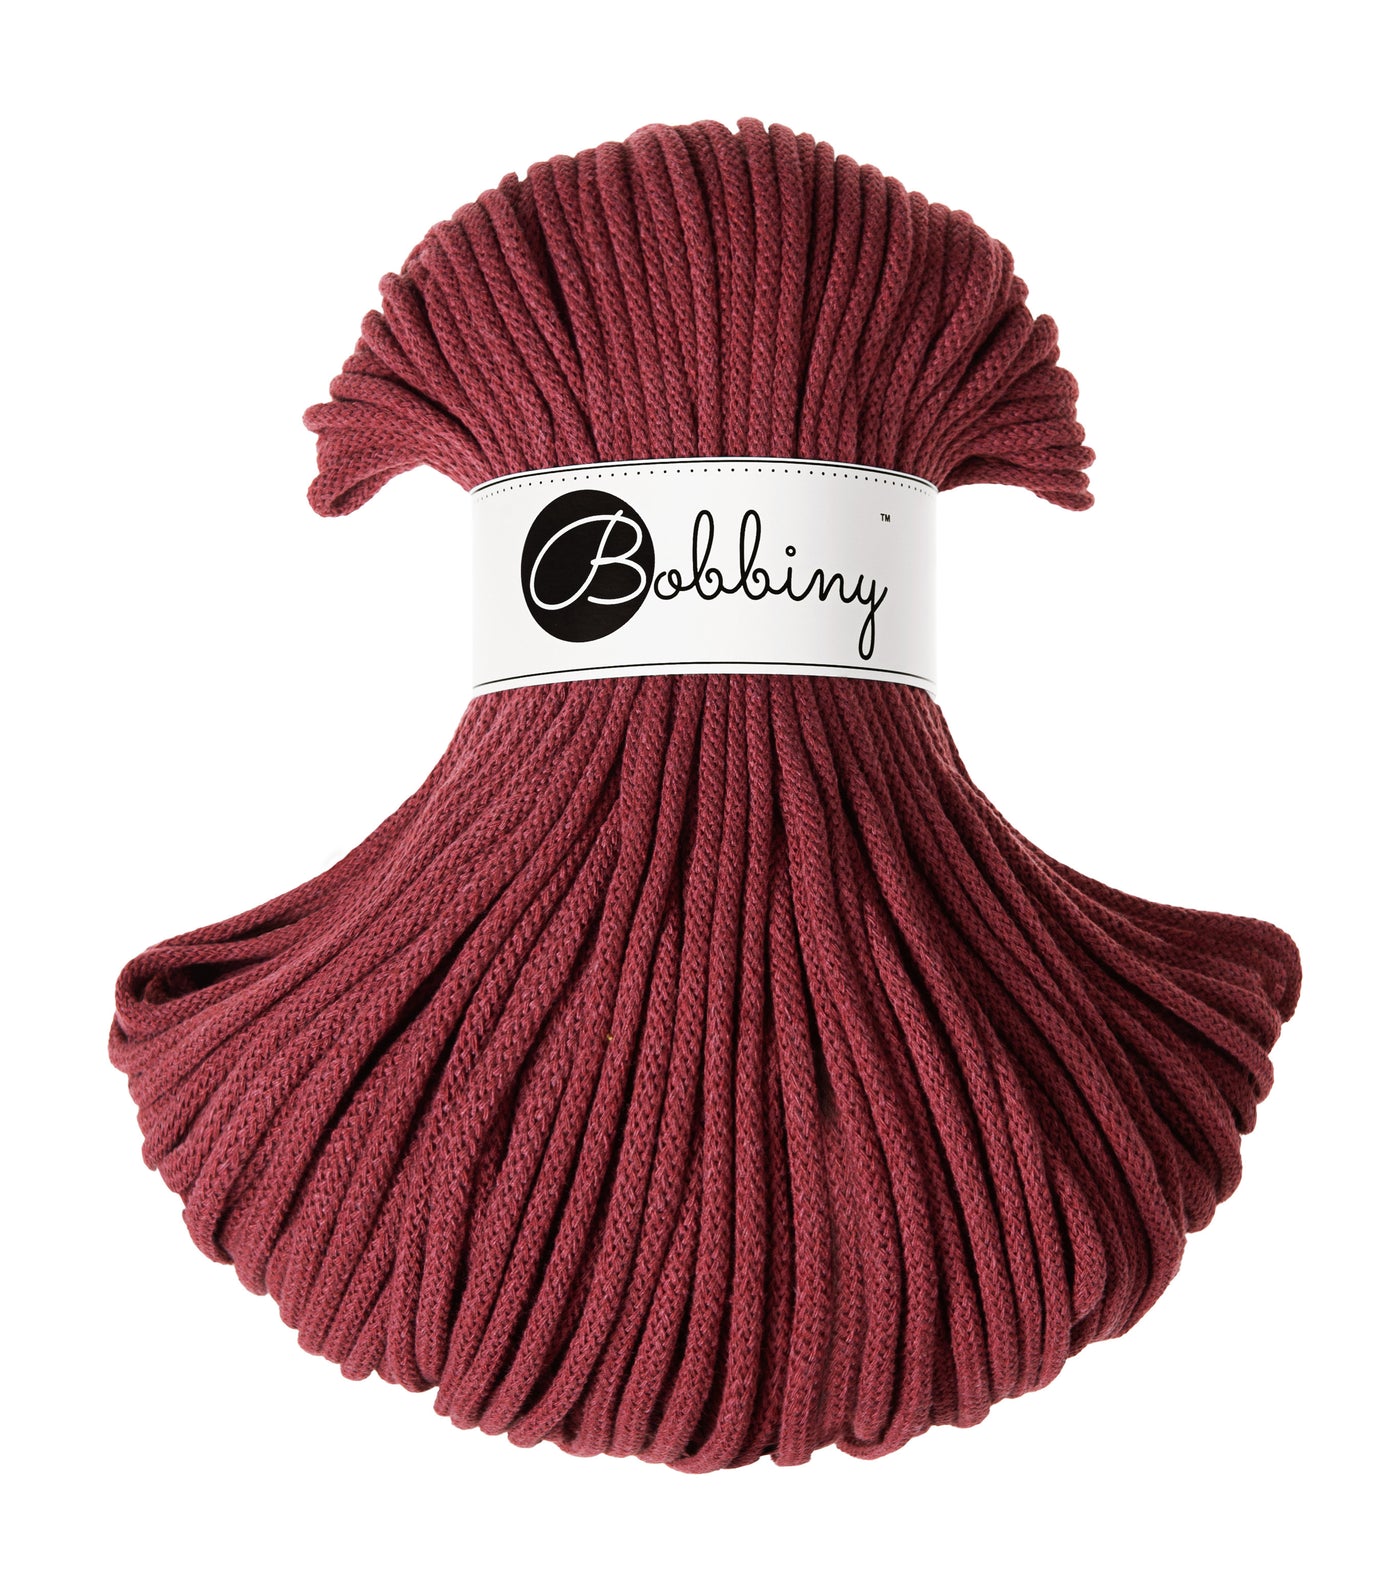 These beautiful Bobbiny cords are made in Poland from 100% recycled cottons and are non-toxic, certified safe for children and meet certified worldwide textile standards.  5mm Diameter  100 metres Length  Recommended for use with 10-12mm crochet or knitting needles  Cotton inner and outer layers, perfect for use with Macrame, Crochet or Knitting   